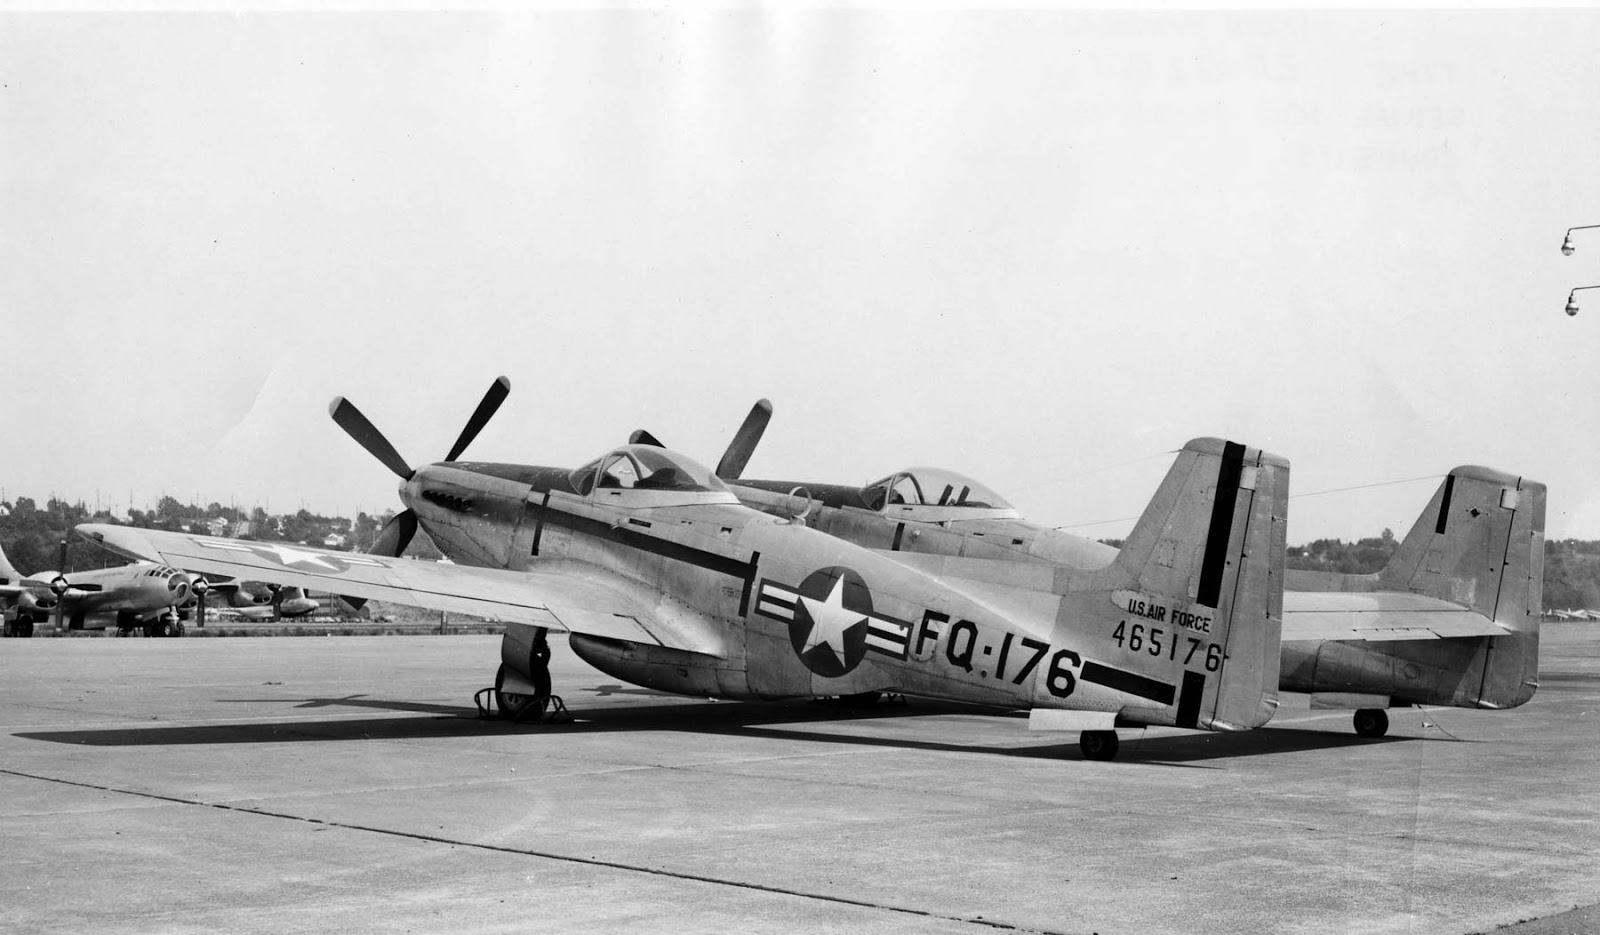 North American P-82/F-82 Twin Mustang.